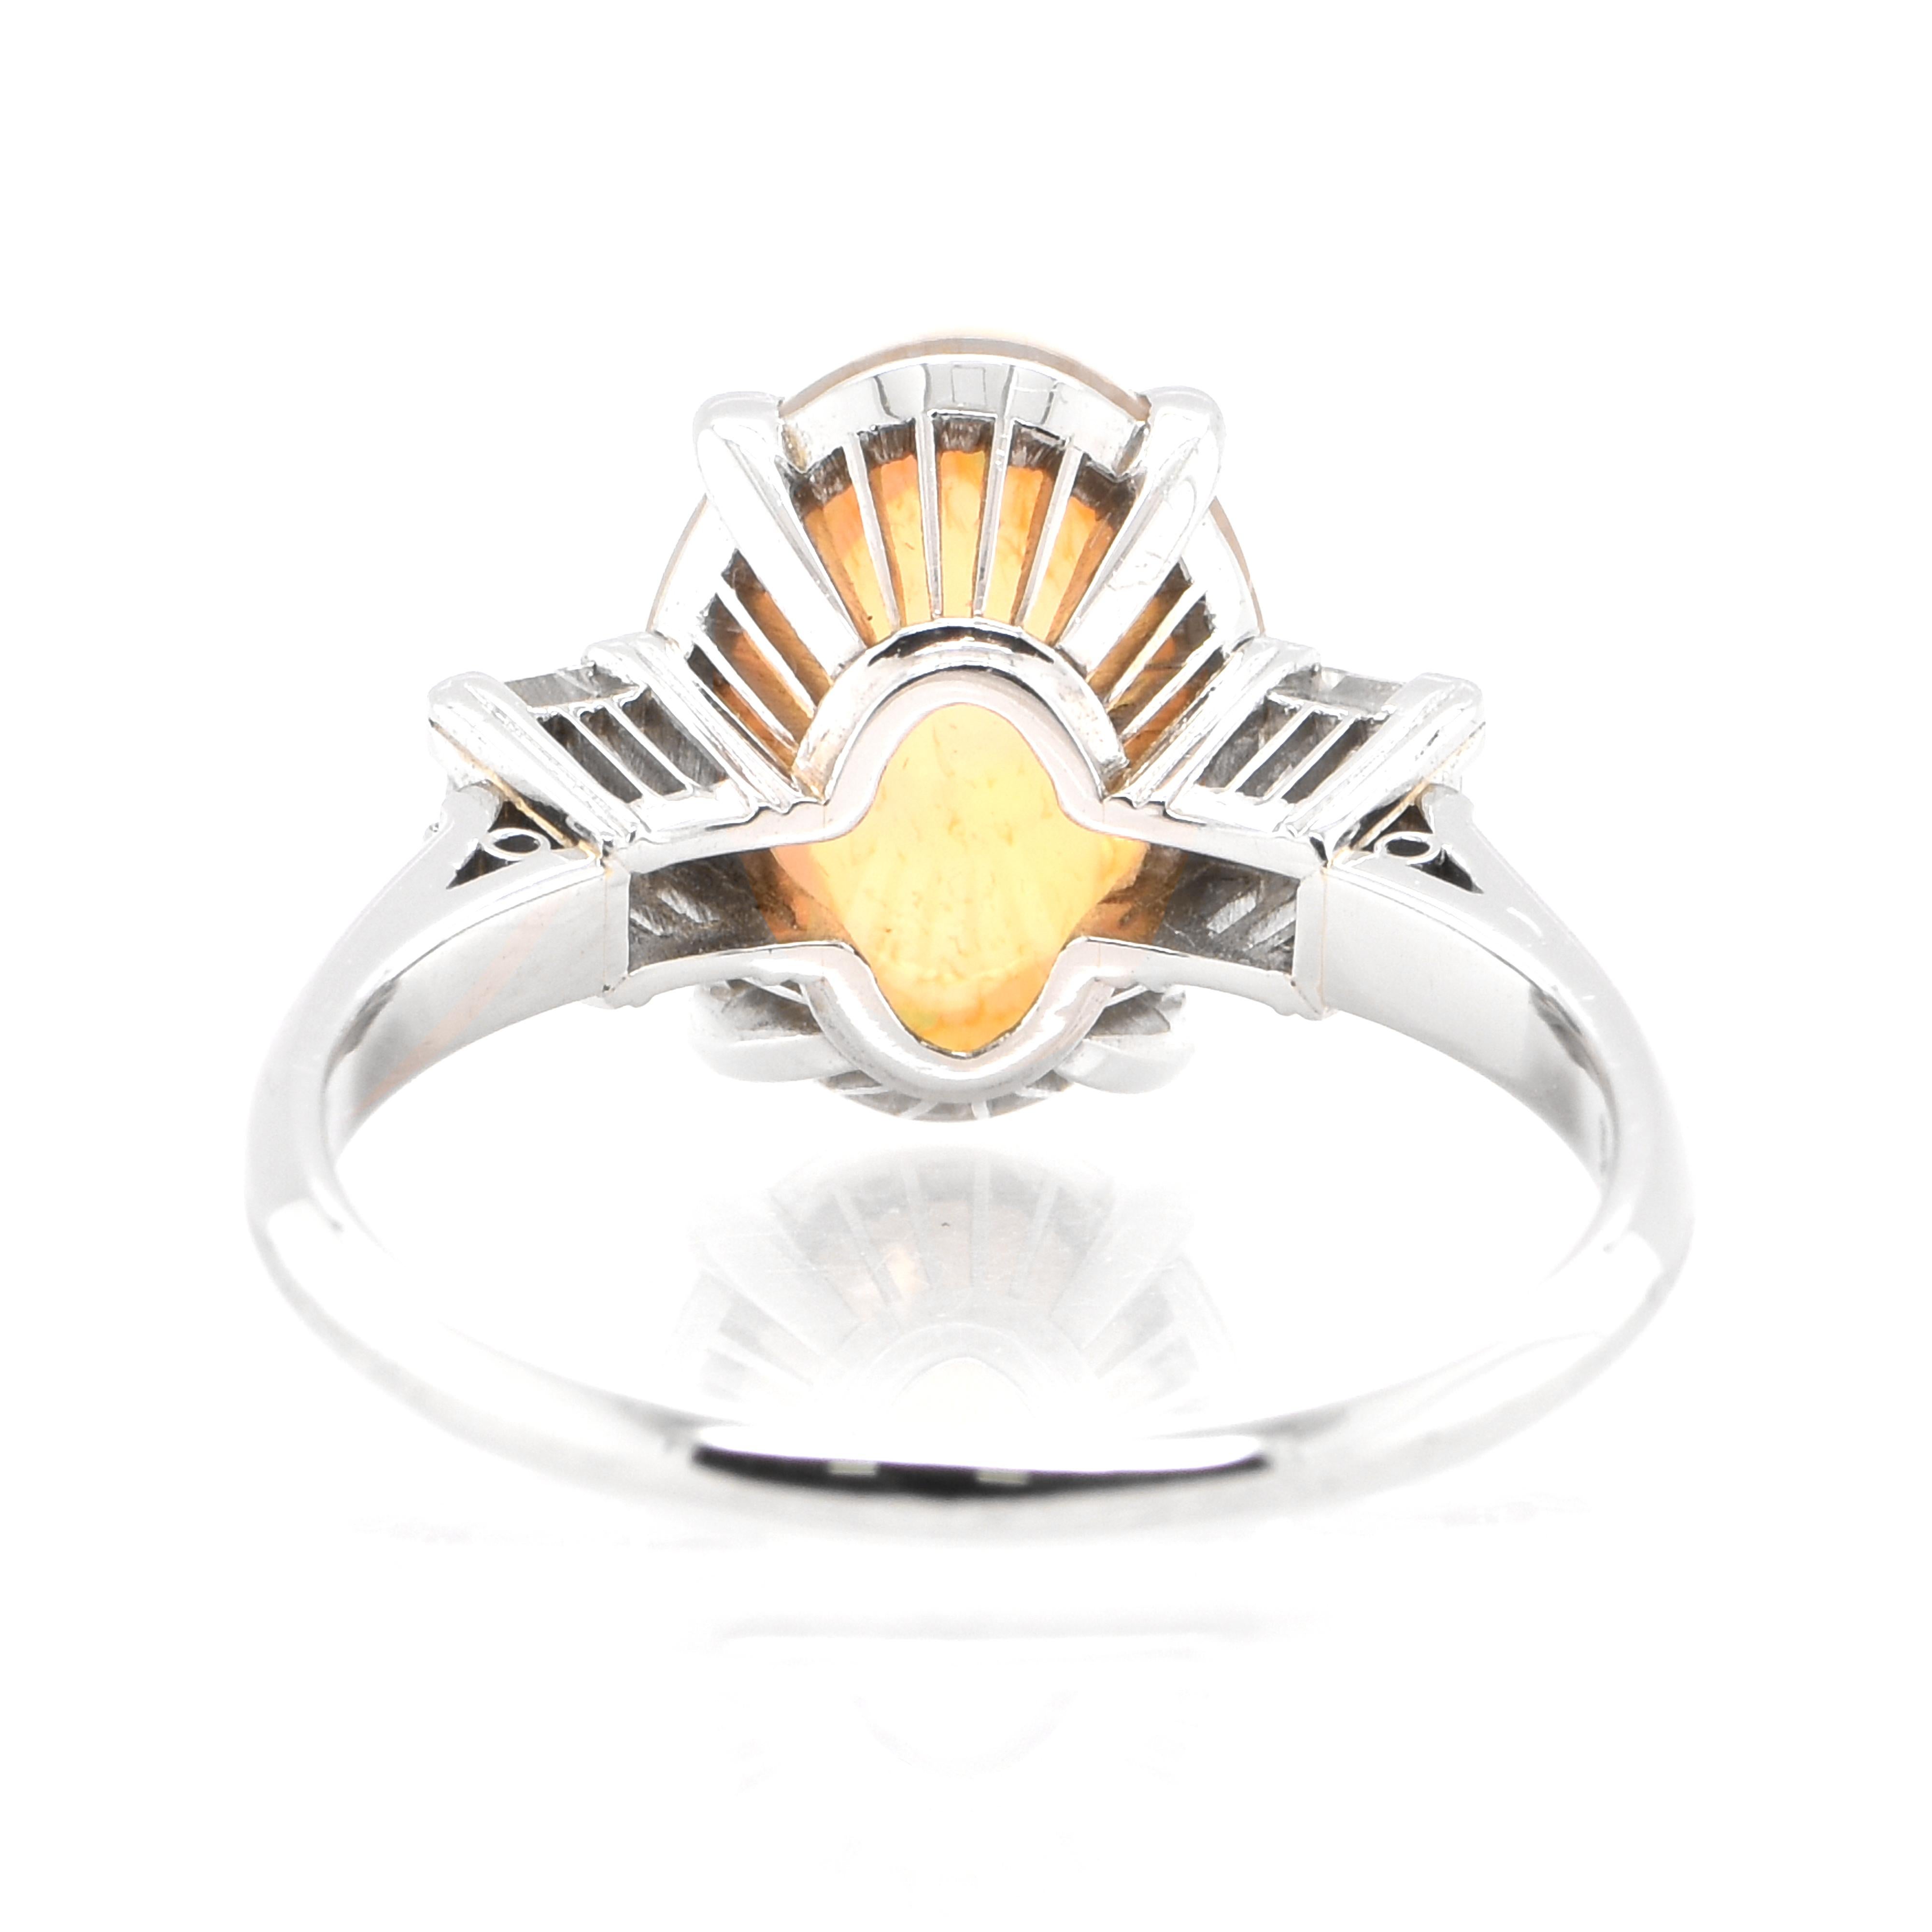 Women's or Men's 2.50 Carat Natural Fire / Cherry Opal and Diamond Ring Set in Platinum